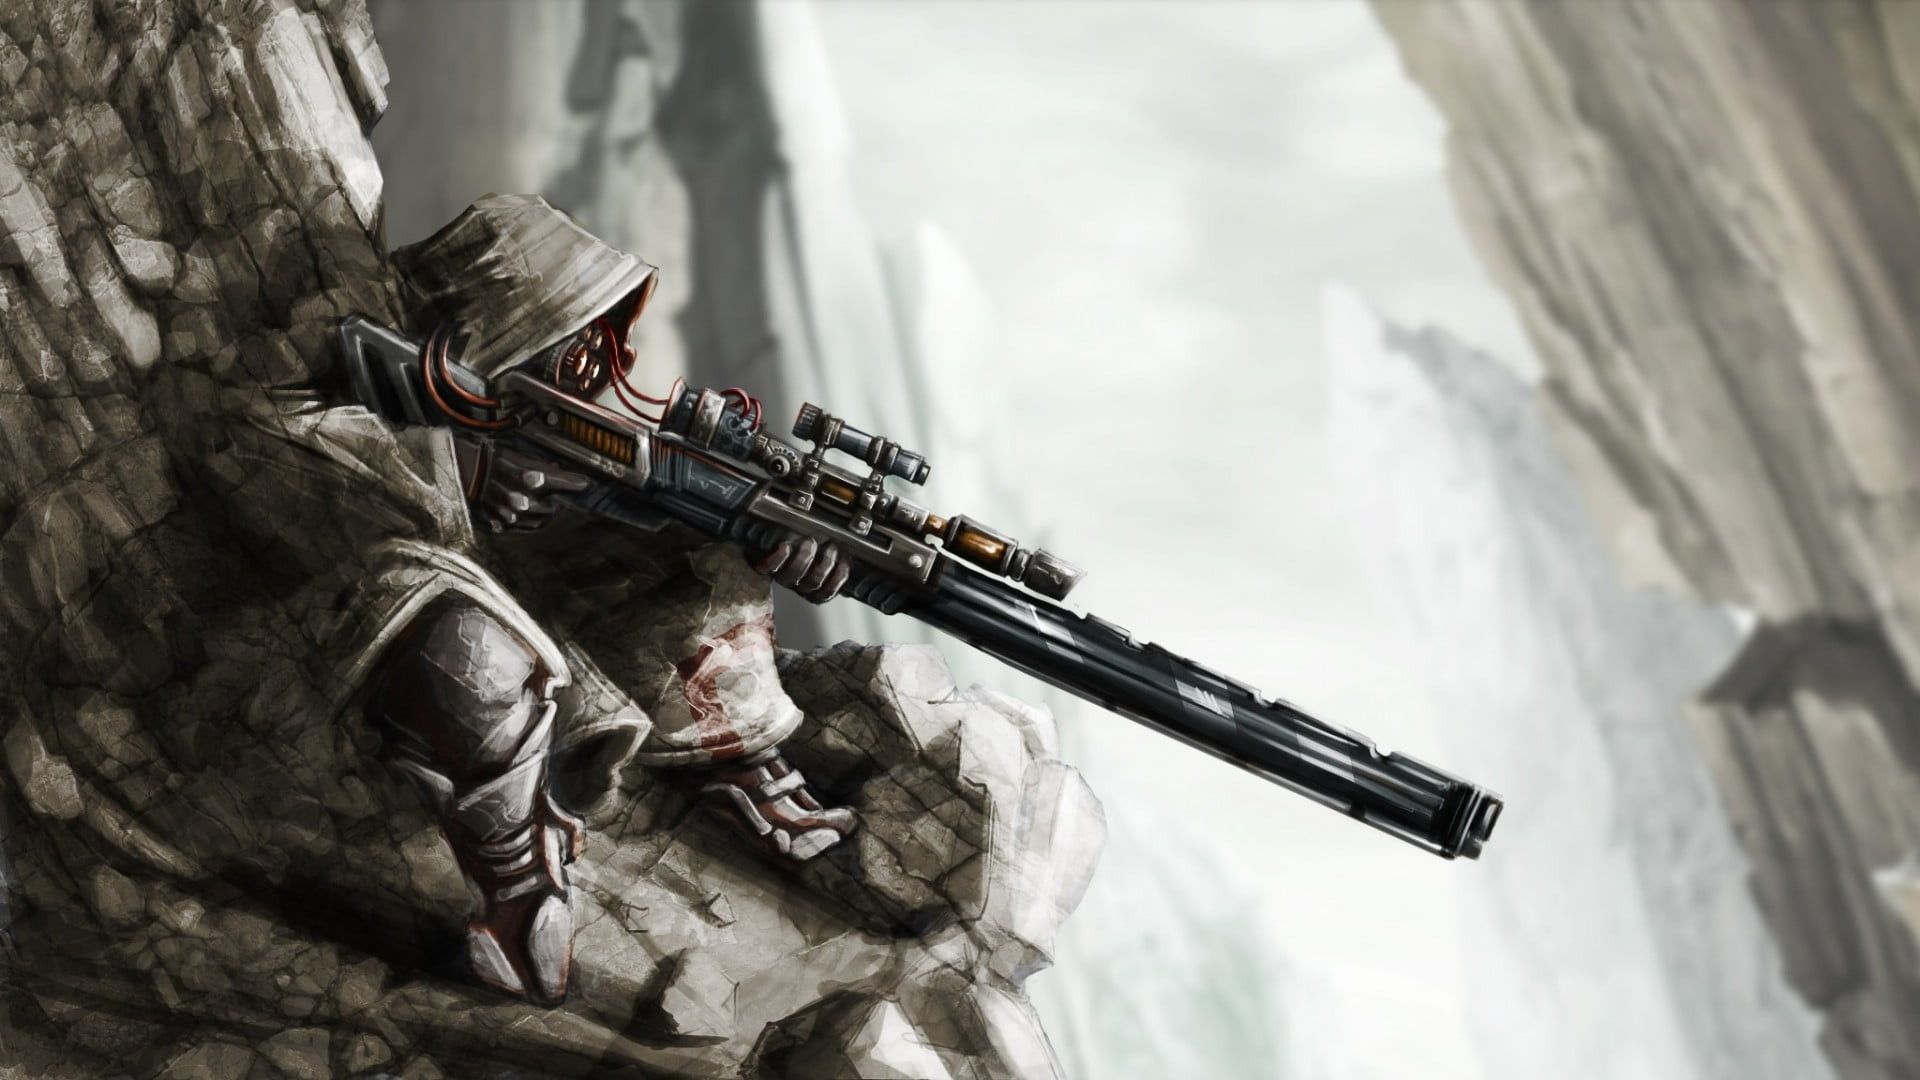 Anime Boy With Sniper Rifle Wallpapers - Wallpaper Cave